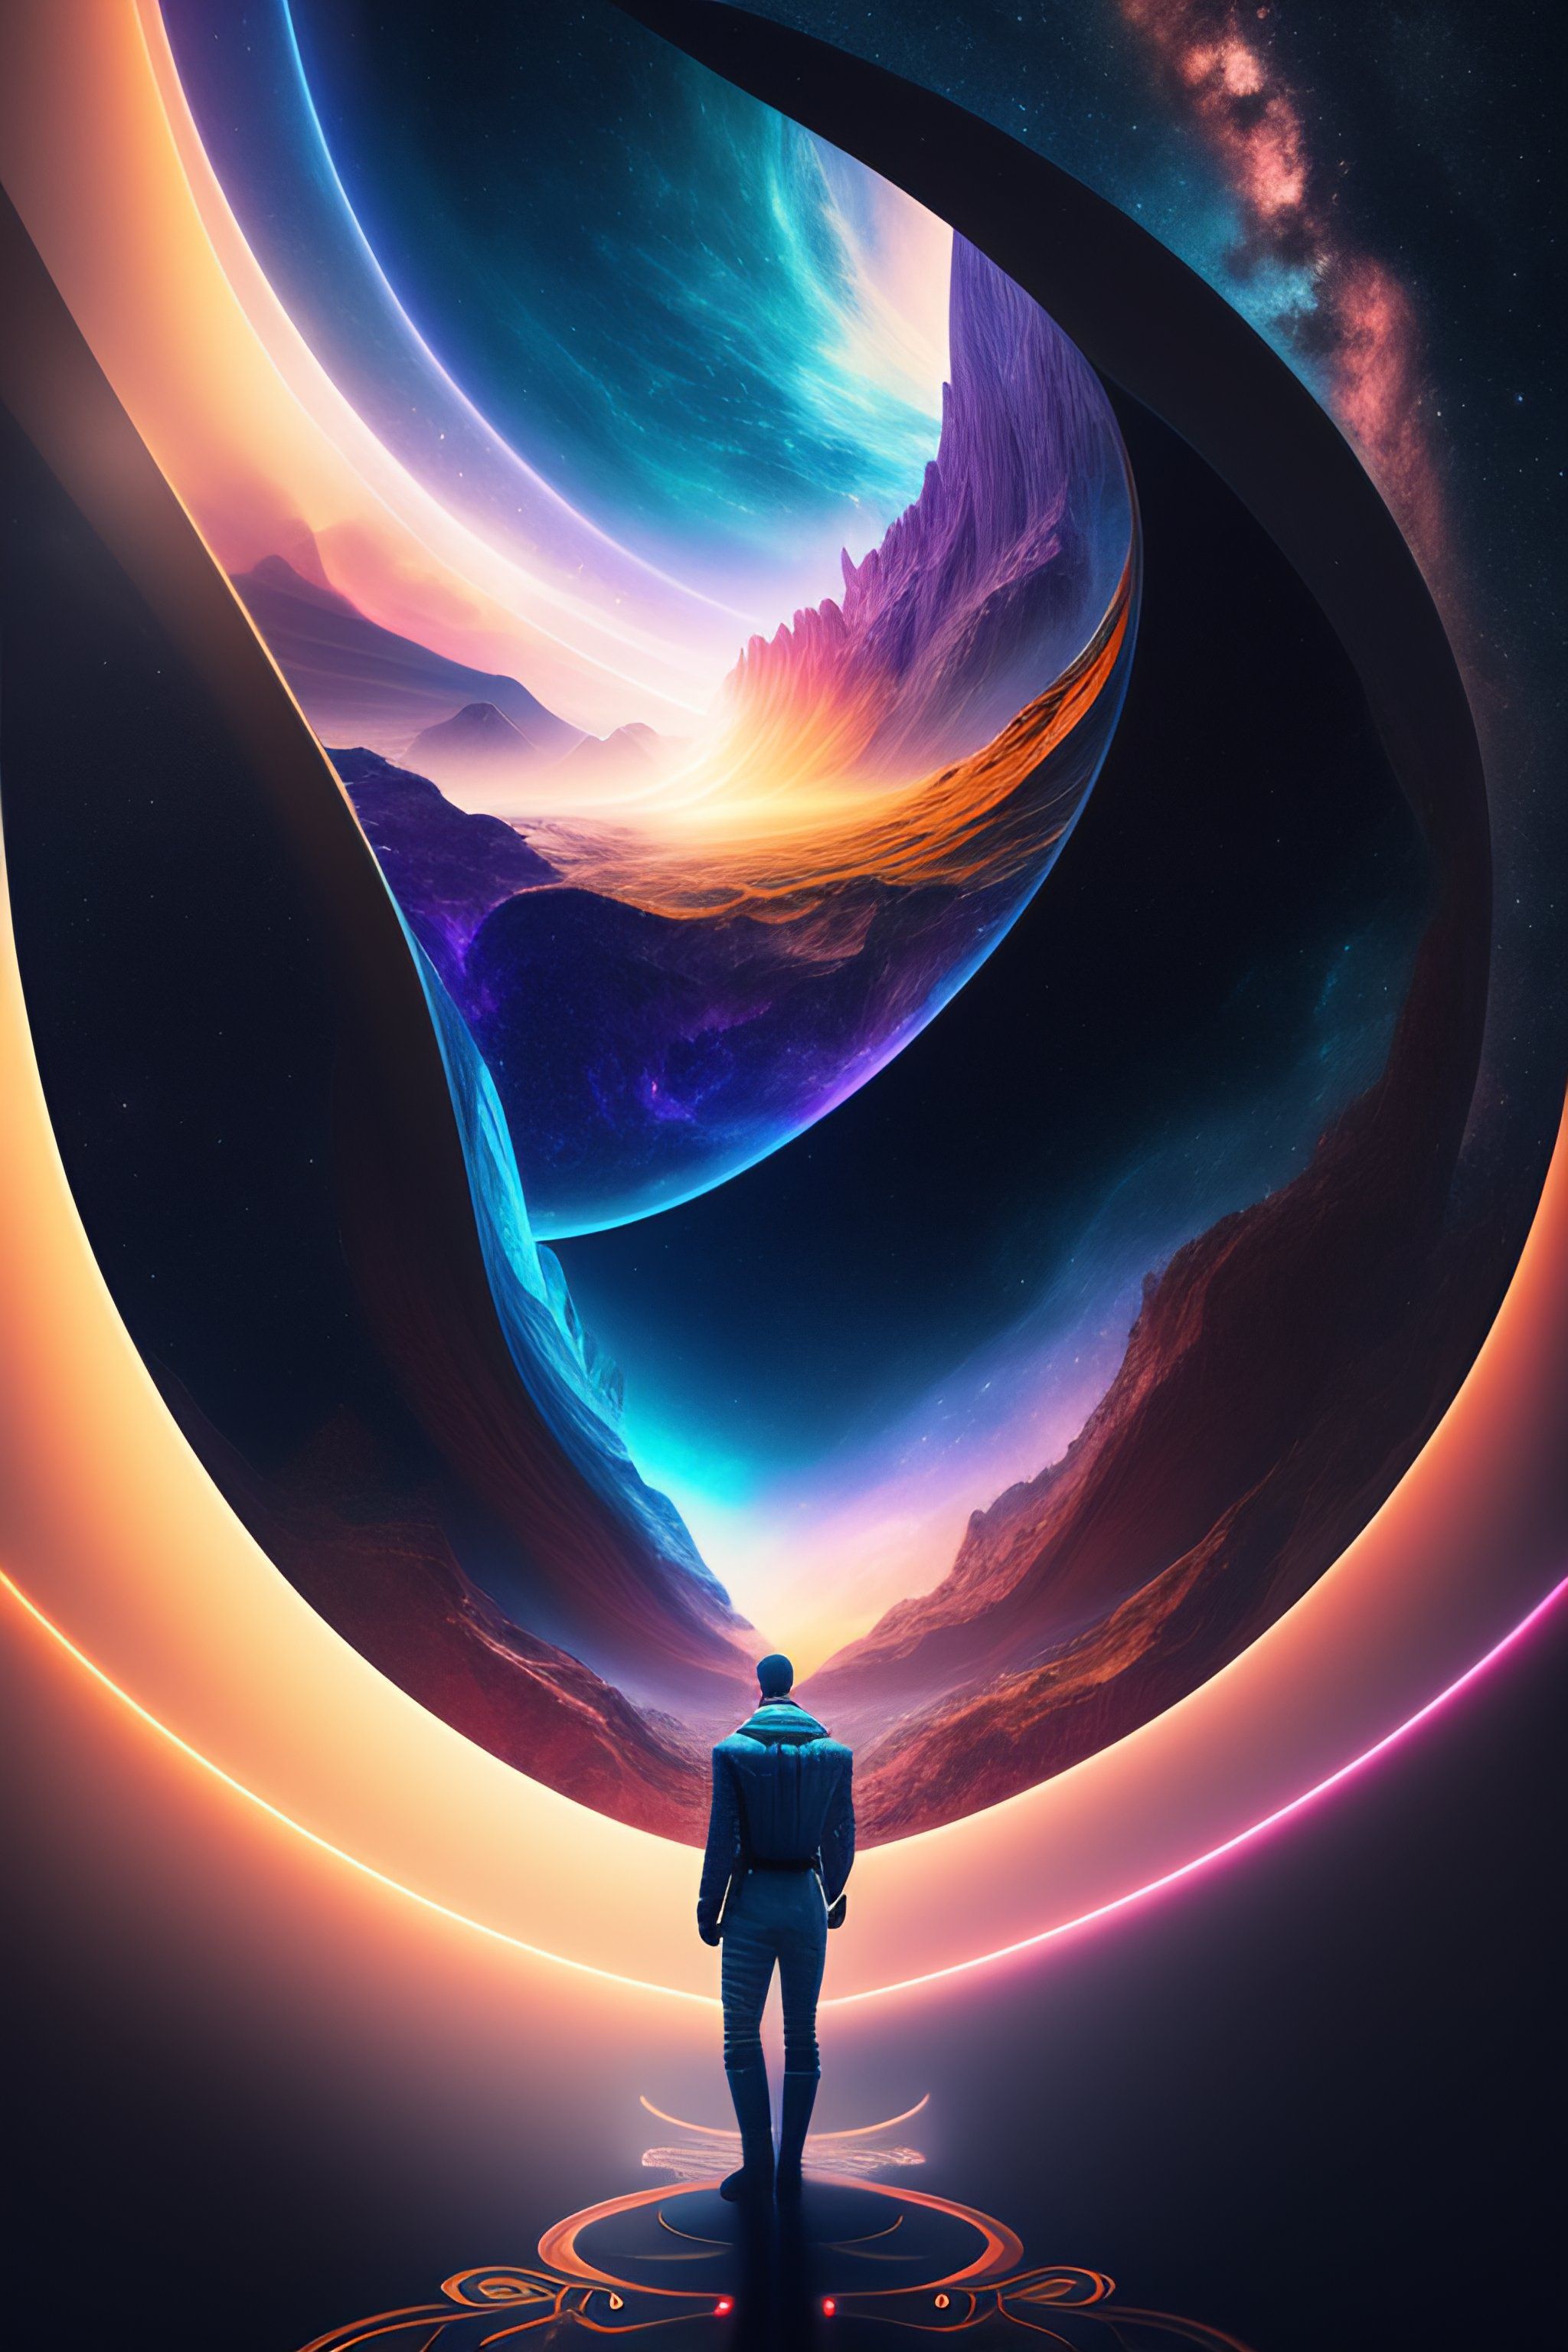 An astronaut in a suit standing in front of a swirling portal to another world - Star Trek